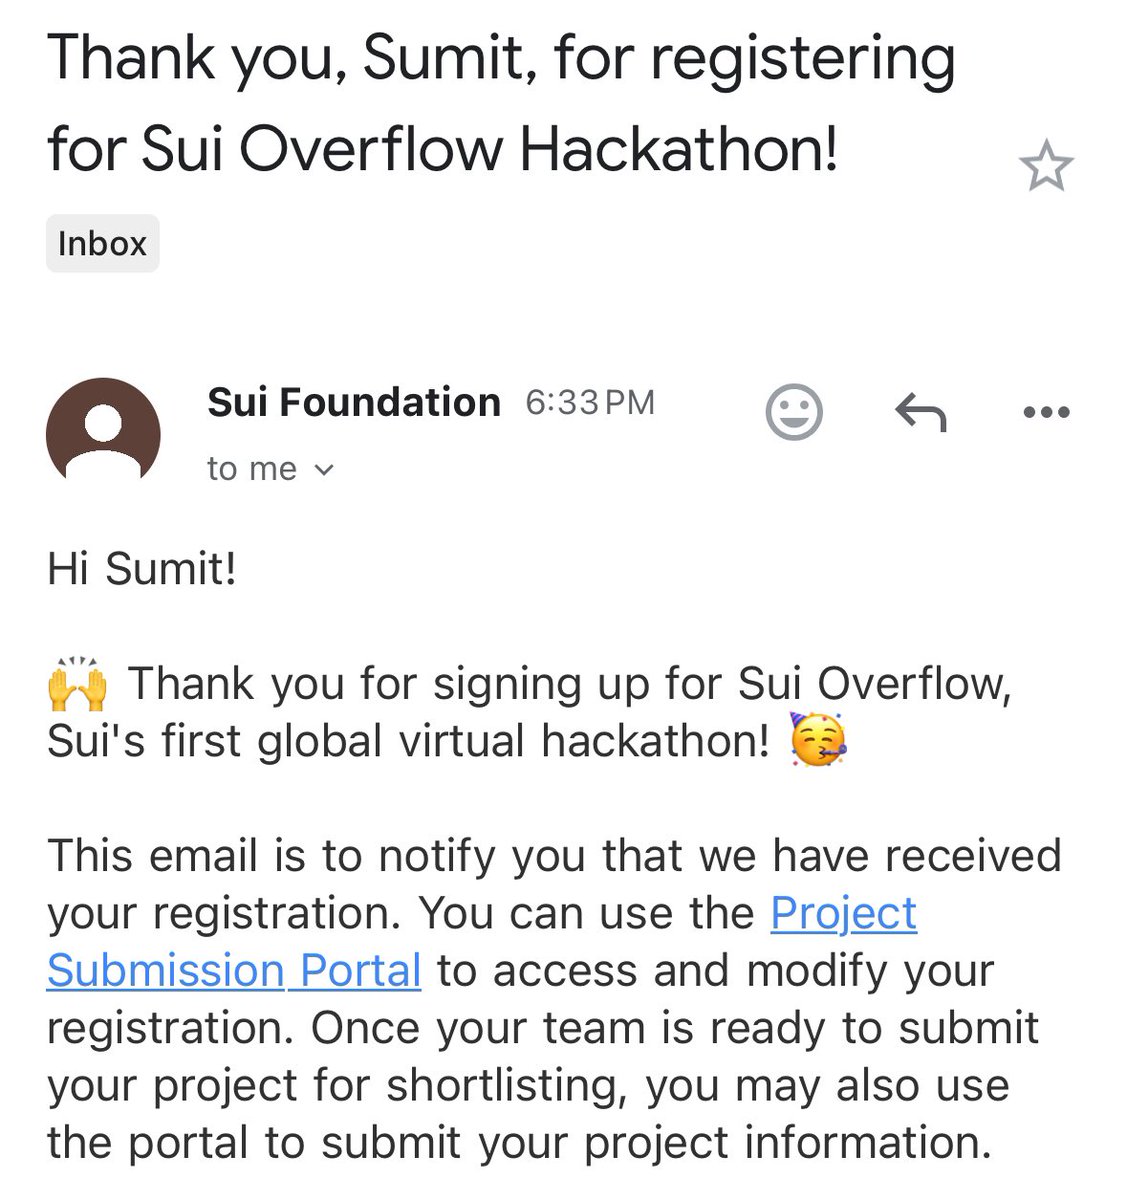 Let me show you how to win a hackathon 😎